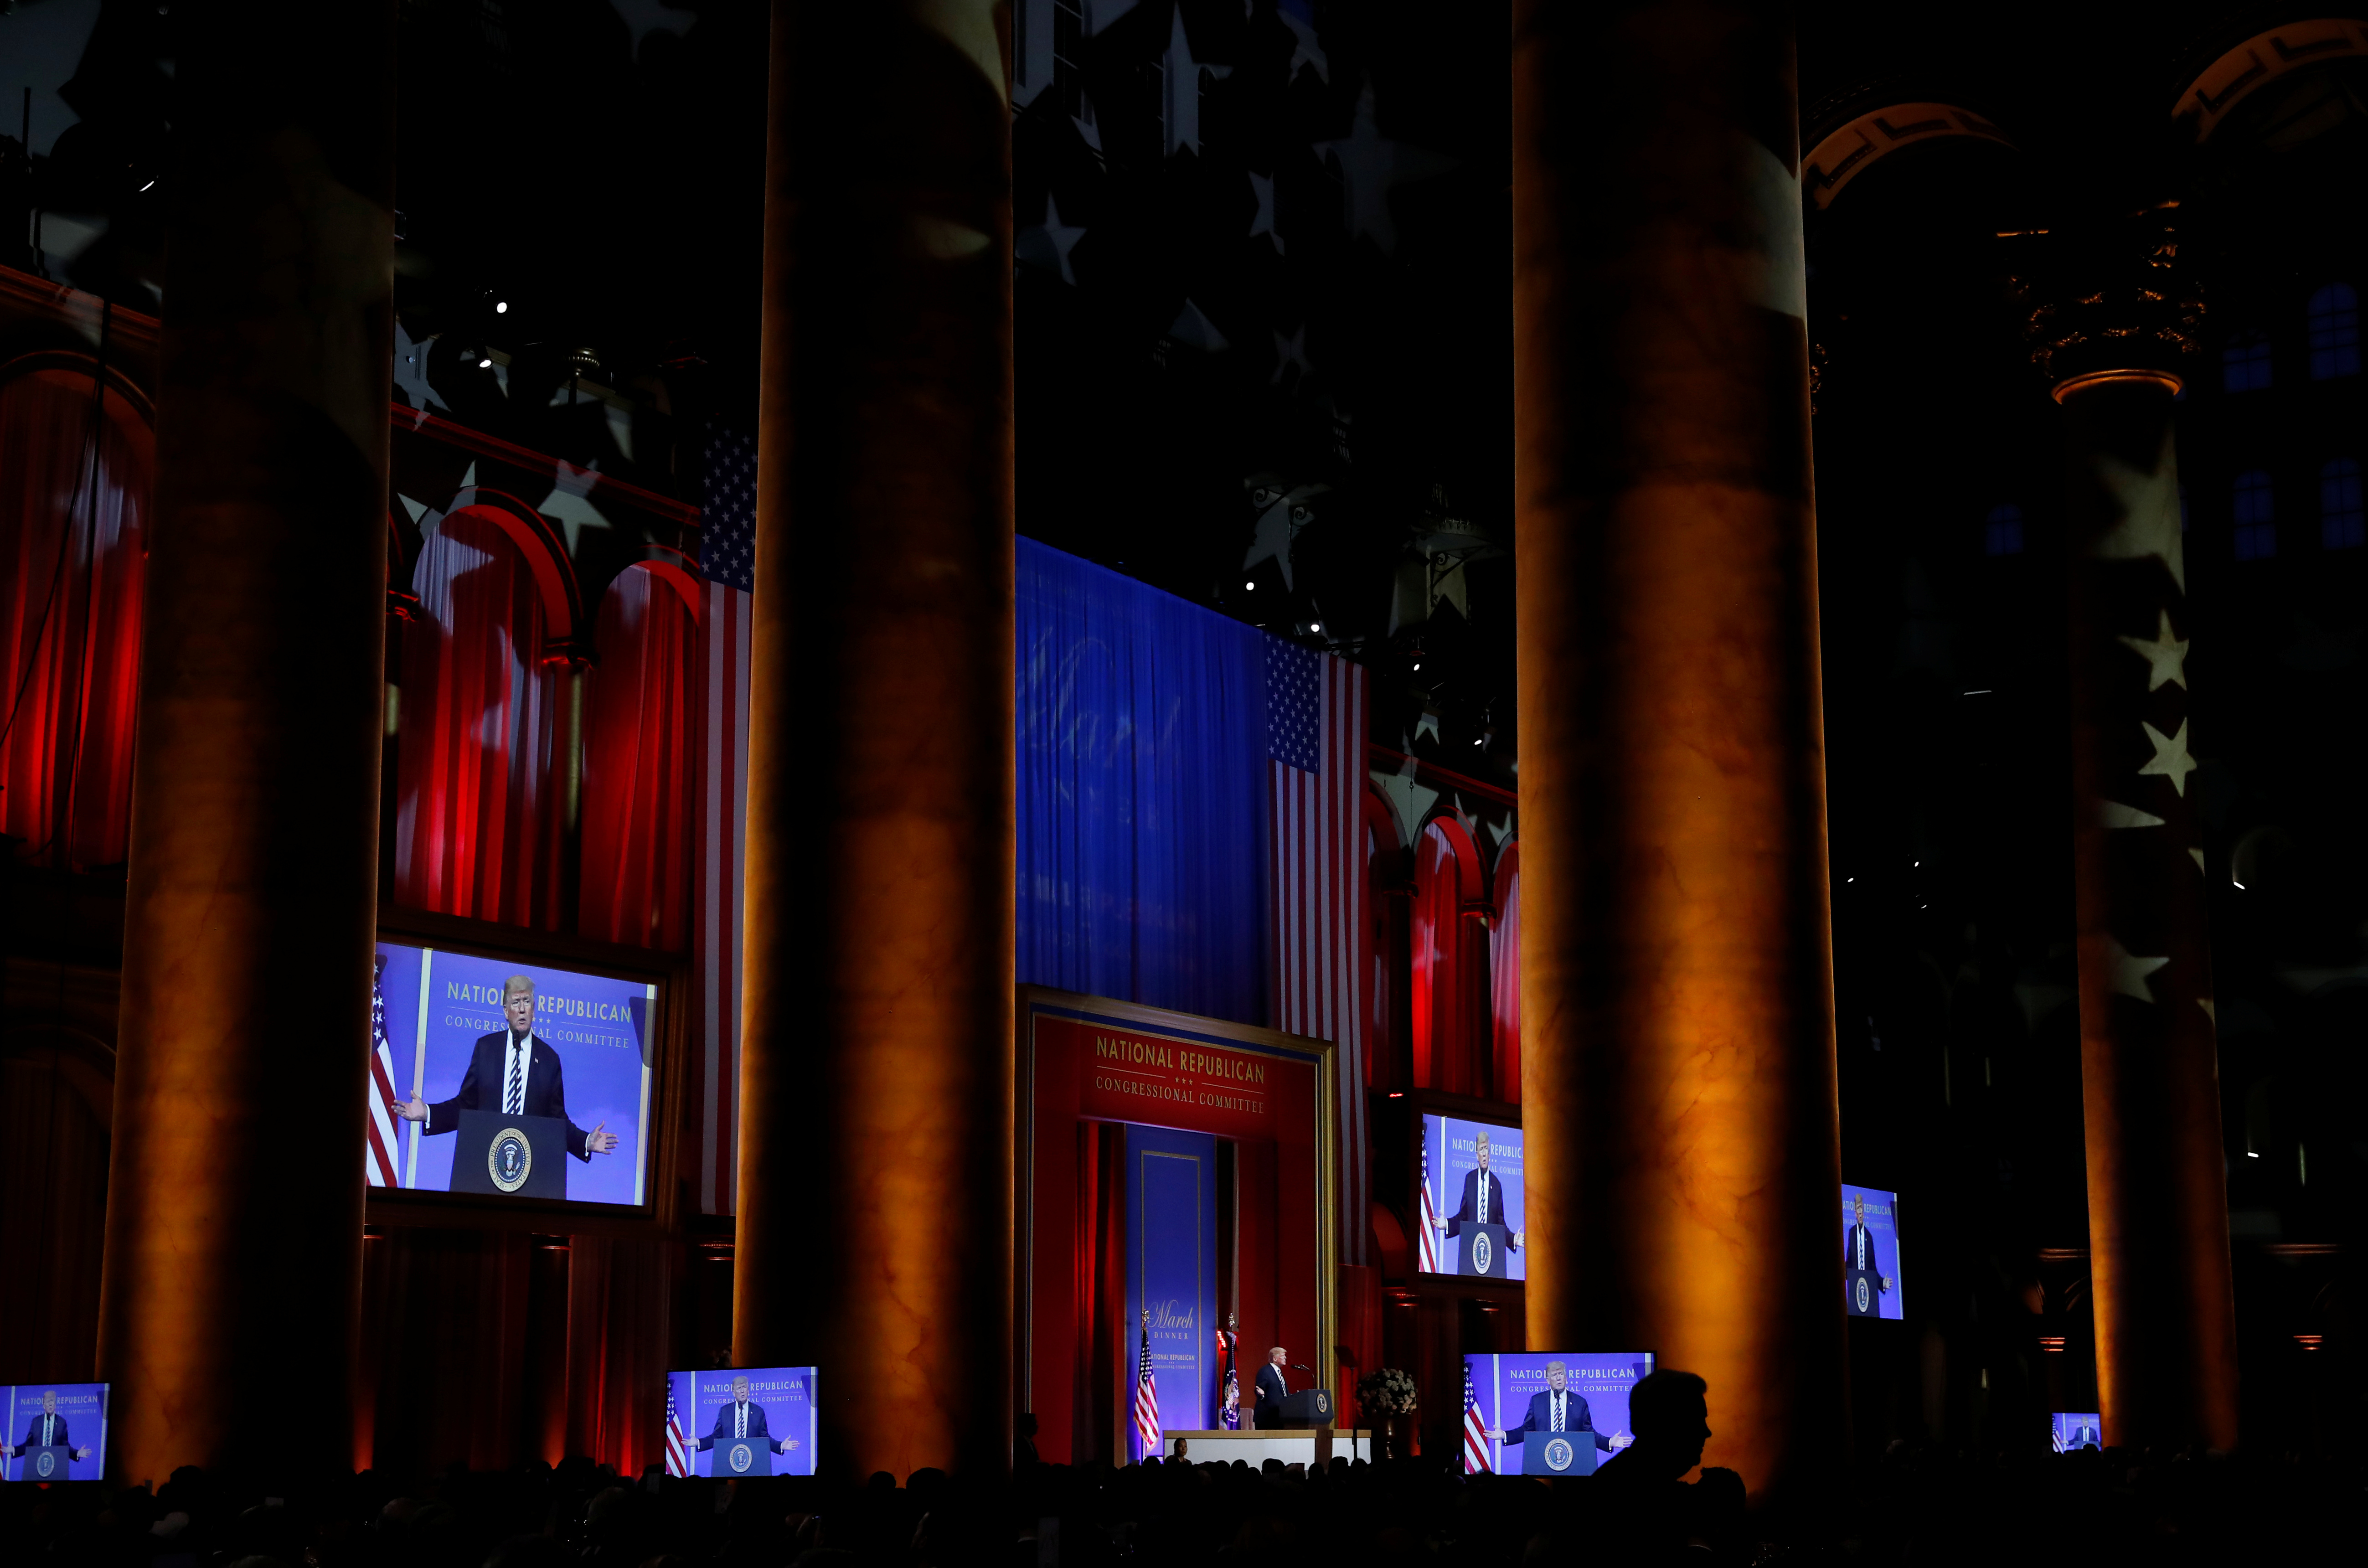 U.S. President Donald Trump delivers remarks at the National Republican Congressional Committee's annual March dinner at the National Building Museum in Washington